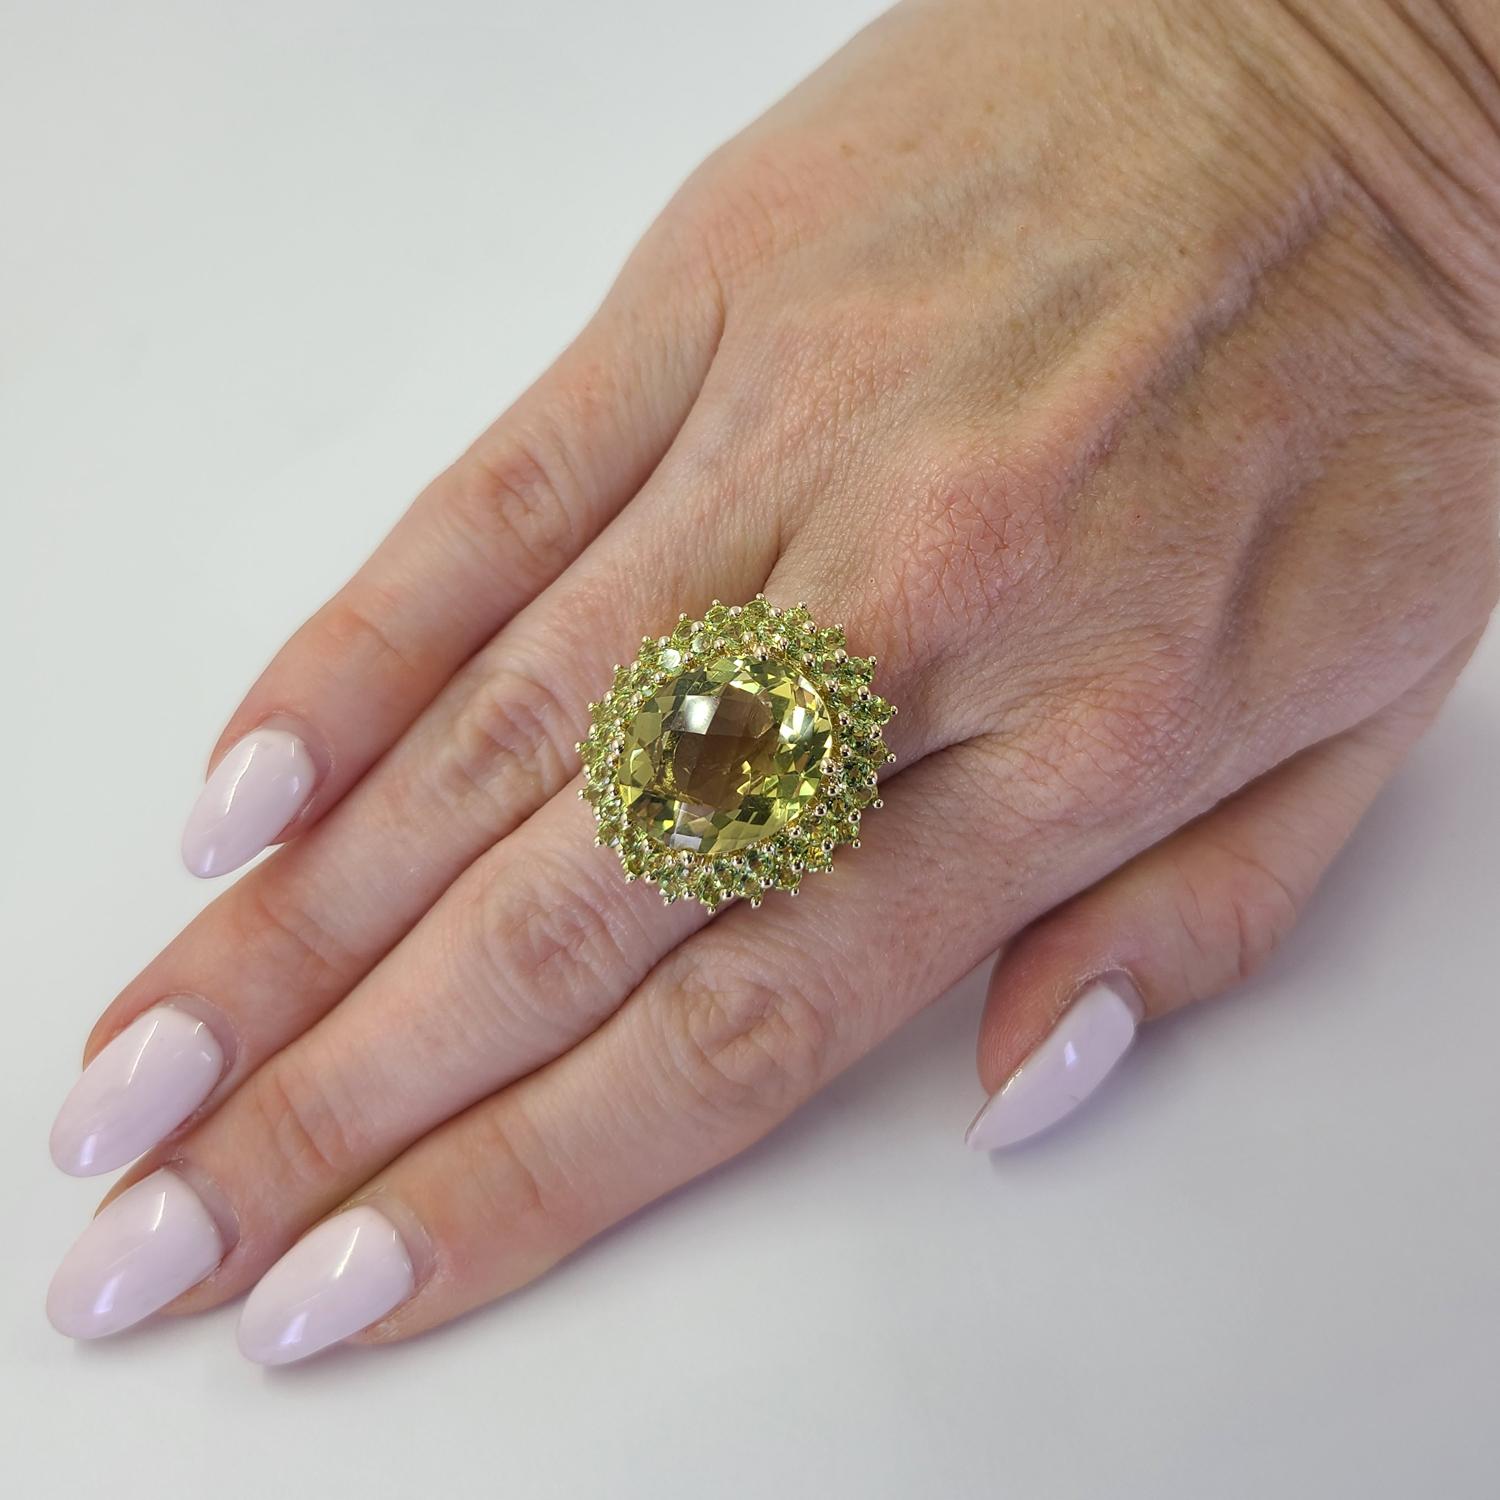 14 Karat Yellow Gold Cocktail Ring Featuring An Oval Lemon Quartz Approximately 10 Carats Accented By A Double Halo of 44 Round Green Tourmaline Totaling Approximately 1.30 Carats. Current Finger Size 7; Purchase Includes One Sizing Service Prior to